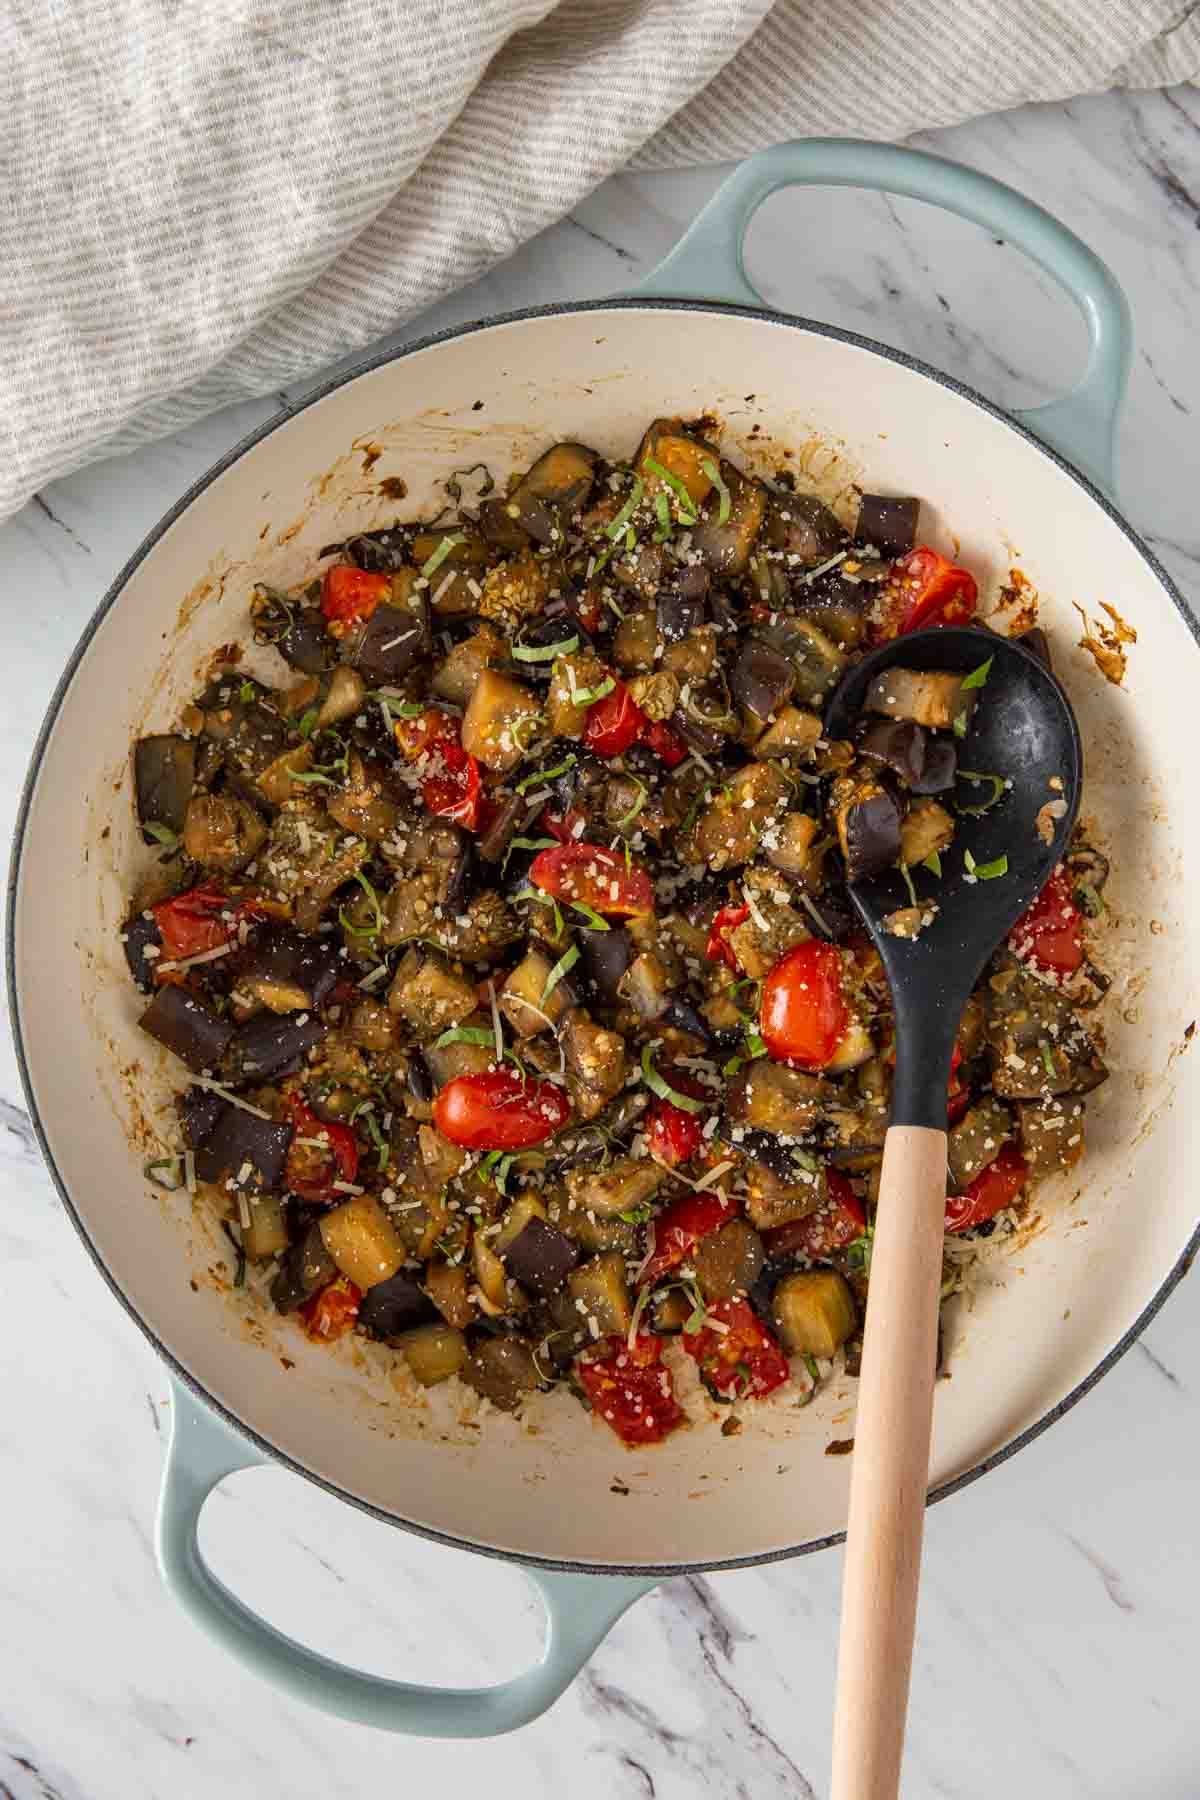 Sauteed eggplant and tomatoes in a large skillet with serving spatula.